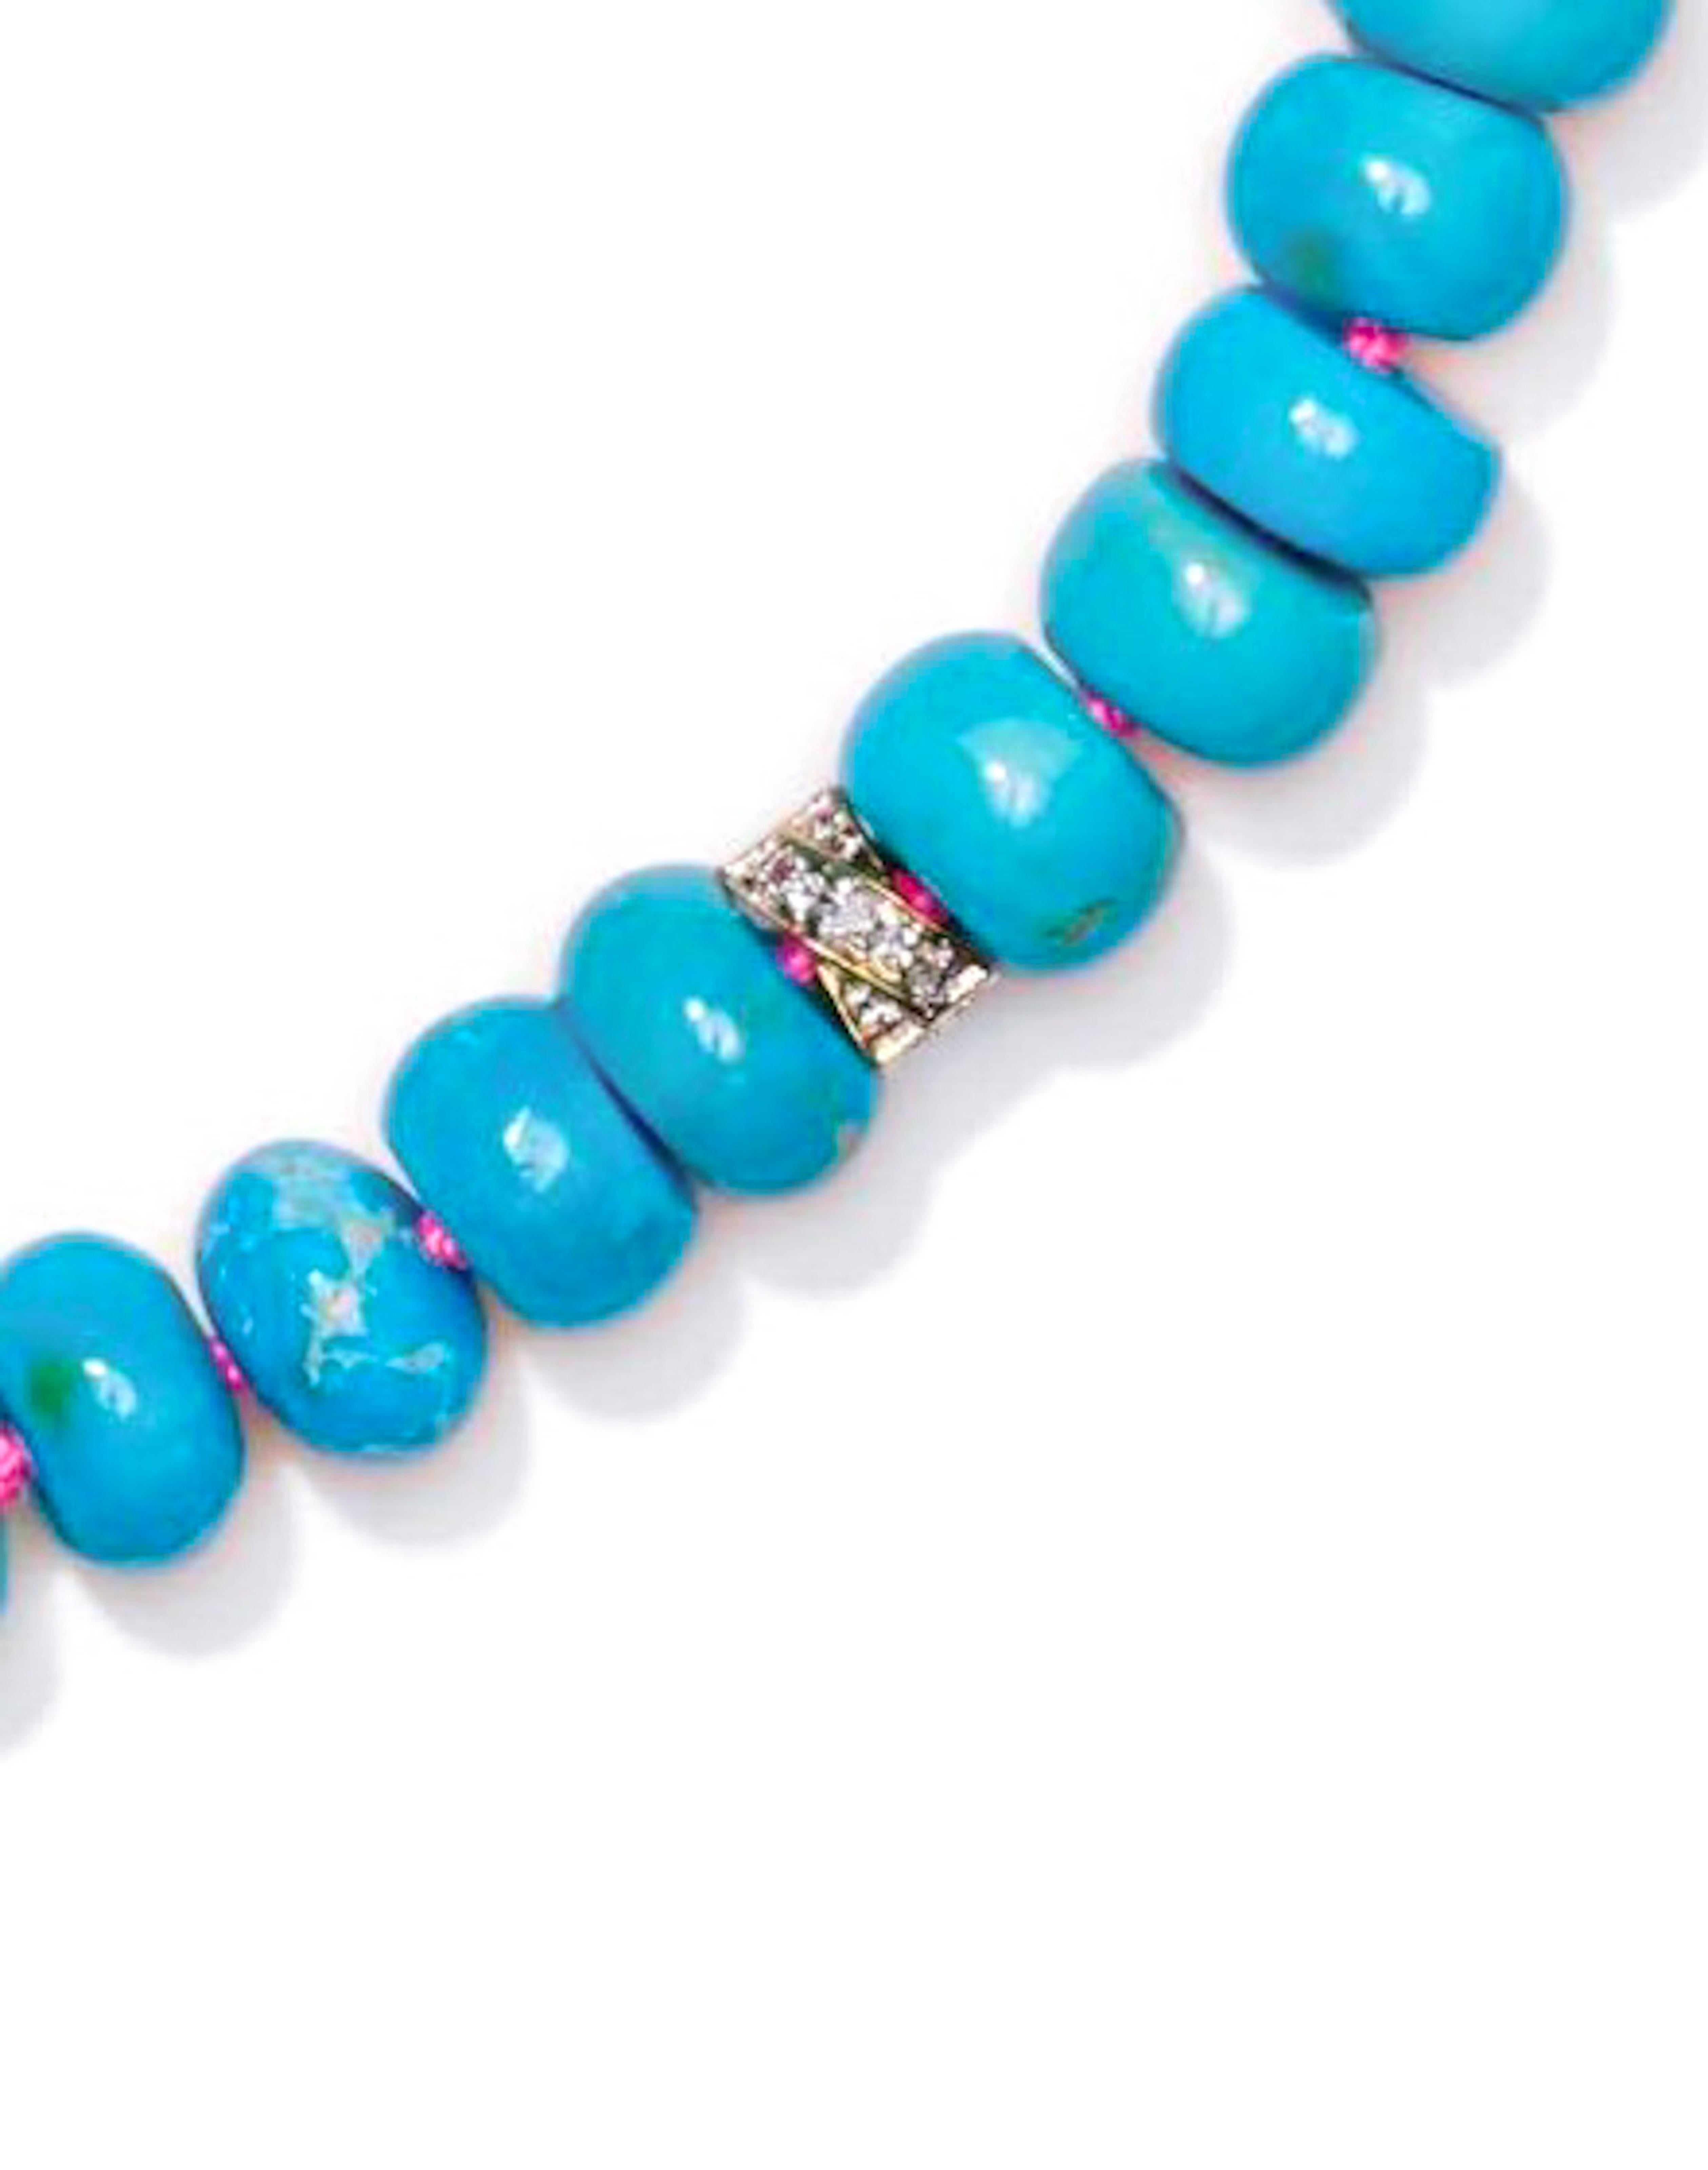 Sleeping beauty turquoise beaded necklace with diamonds in solid gold. 
The polished beads are as large as 8mm and sky blue in color. Knotted on Barbie pink silk thread. 
Finished with sparkling diamonds and a 14k Gold Clasp.

size -17 inch